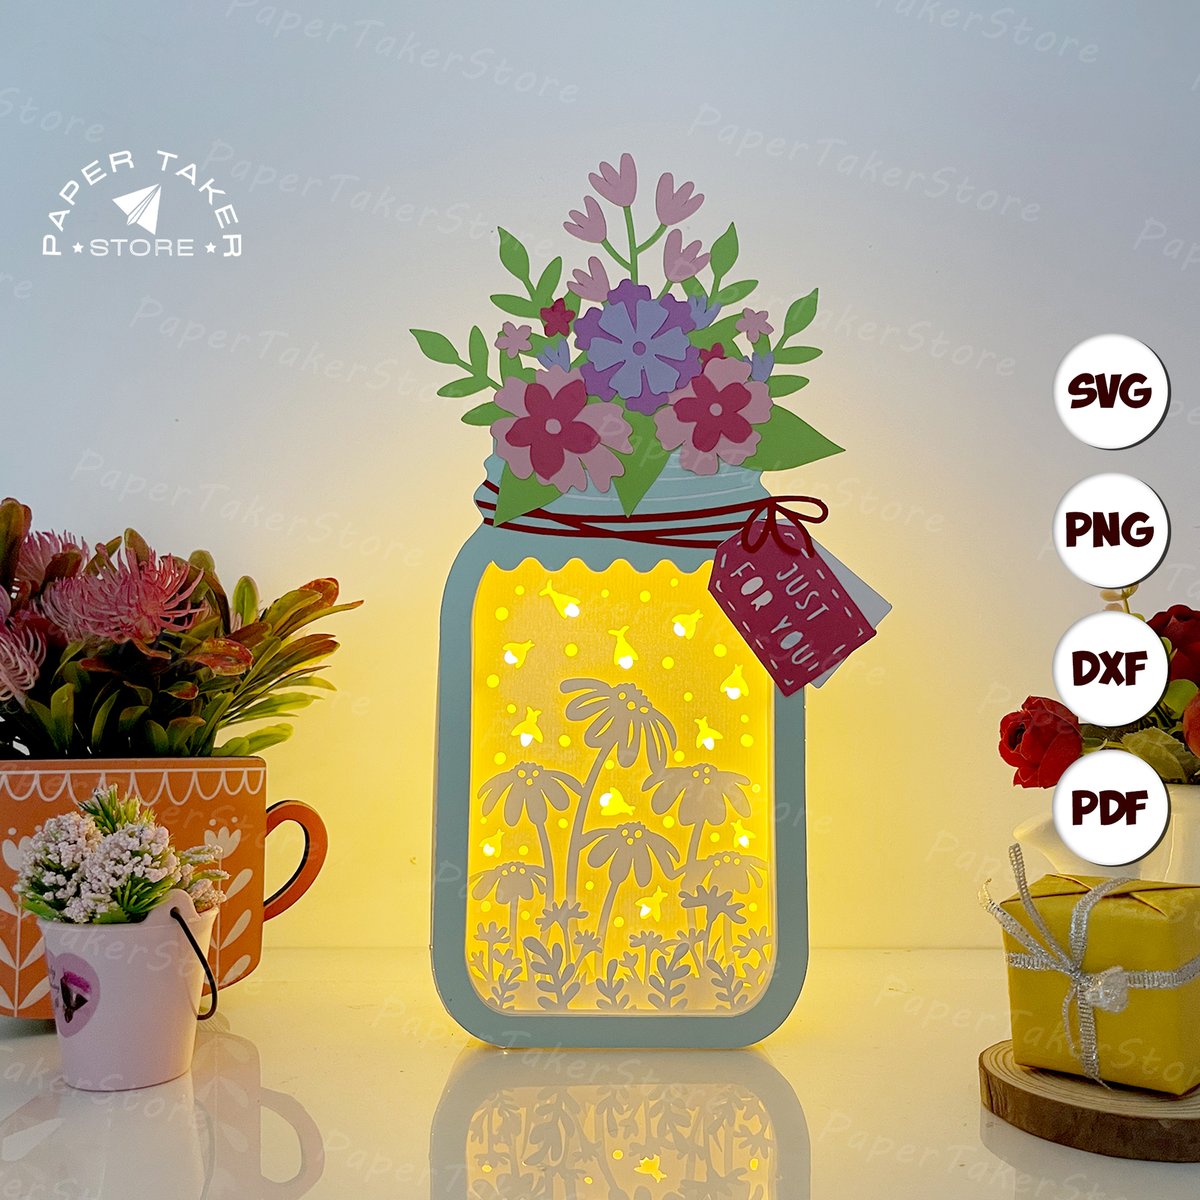 Excited to share the latest addition to my #etsy shop: Firefly Garden Floral Mason Jar Box SVG for Cricut Projects, 3D Papercut Light Box Sliceform, DIY Floral Mason Jar Box Night Light etsy.me/44wA4li #valentinesday #silhouettestudio #svgforcricut #papercutlightbox